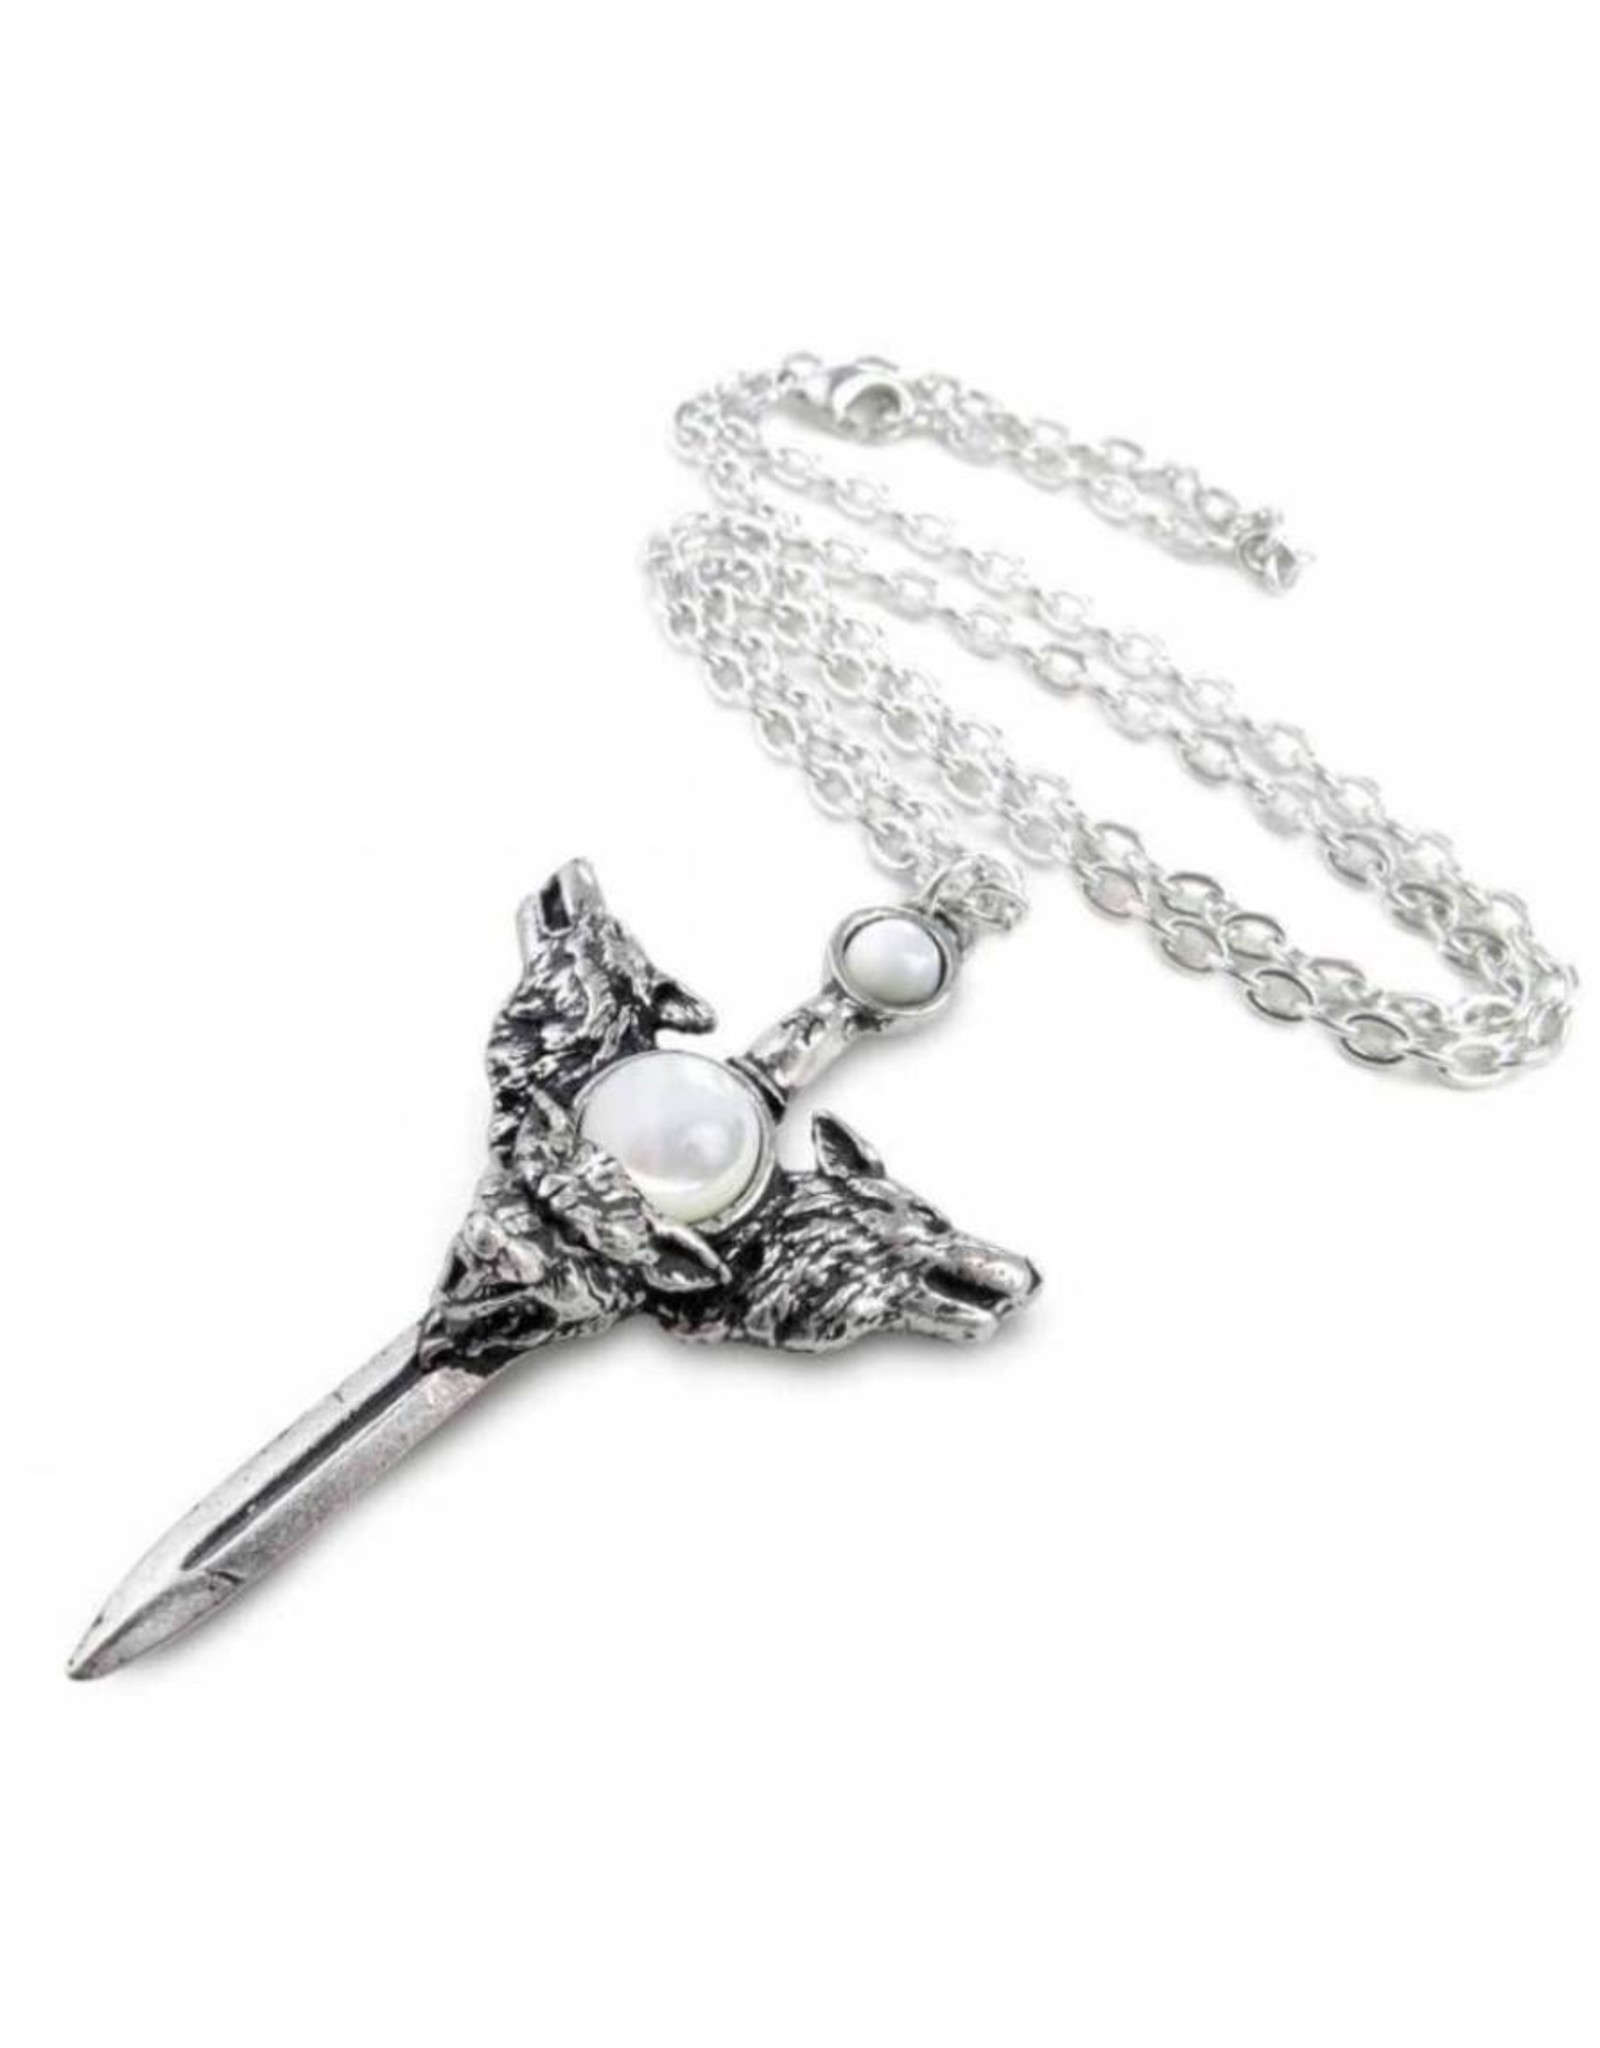 Alchemy Gothic and  spiritual accessories - Wolverine Moon pendant and necklace Alchemy